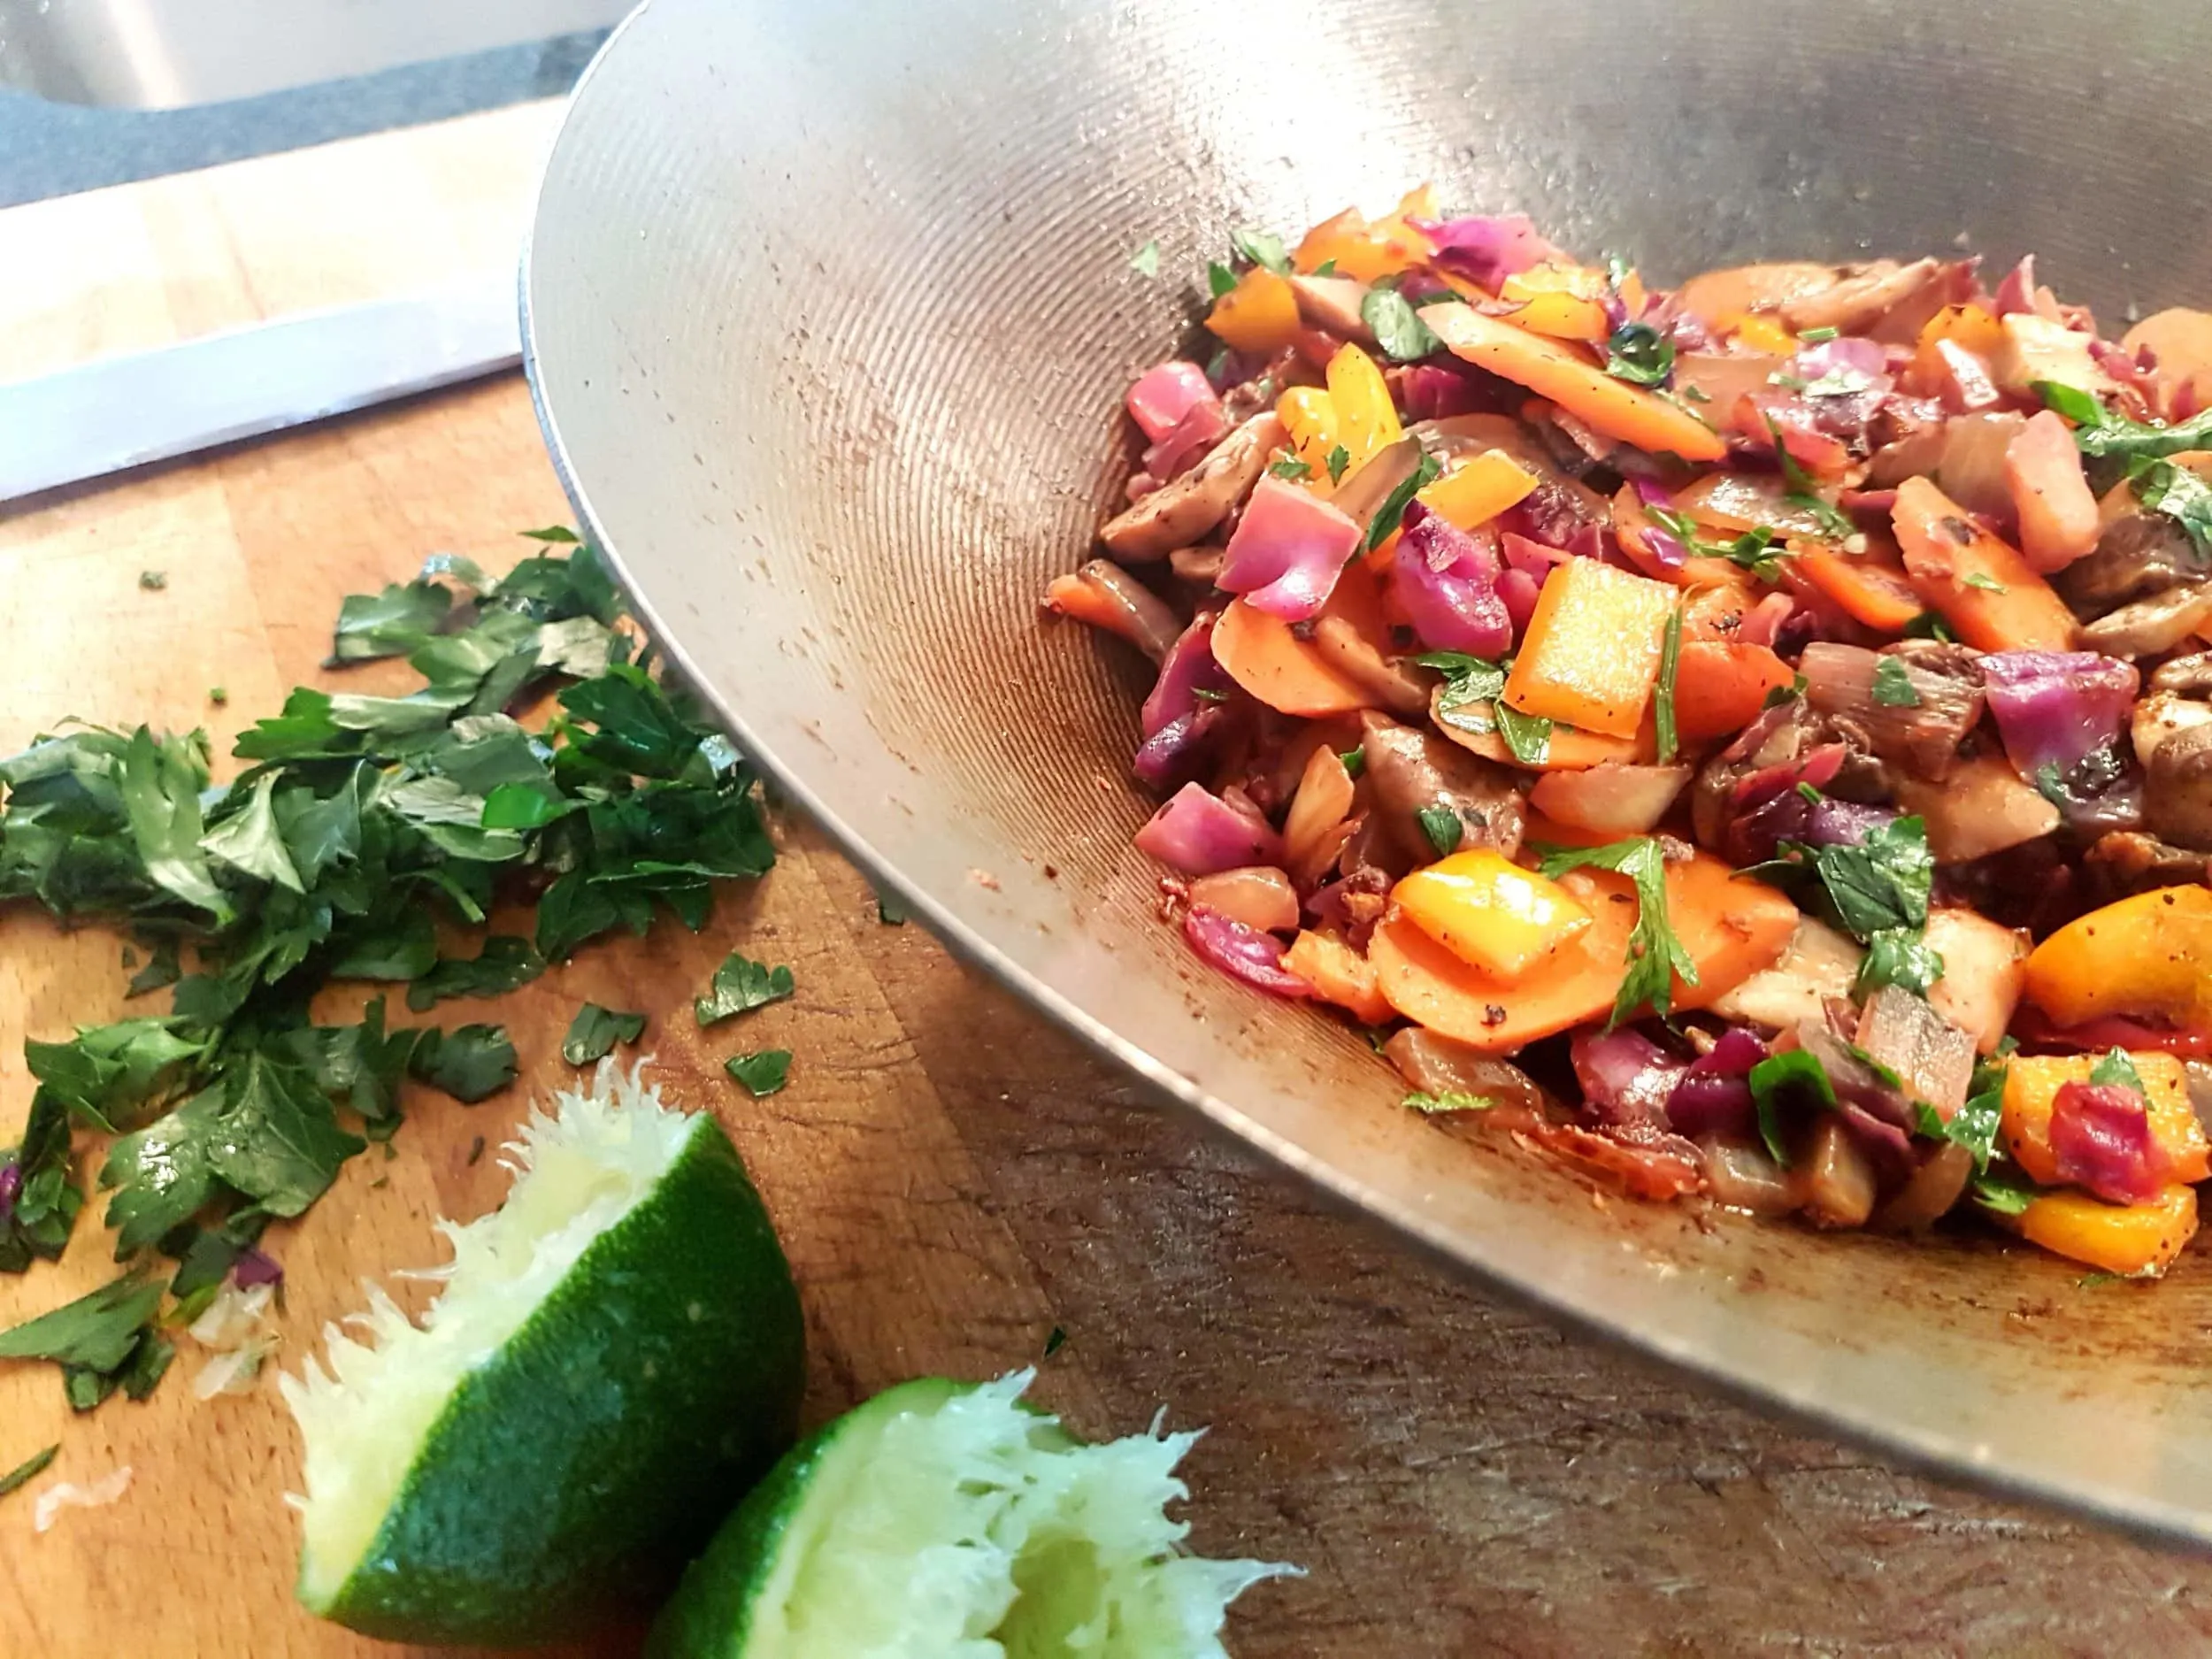 Freshly cooked vegetables in a wok with parsley and lime.